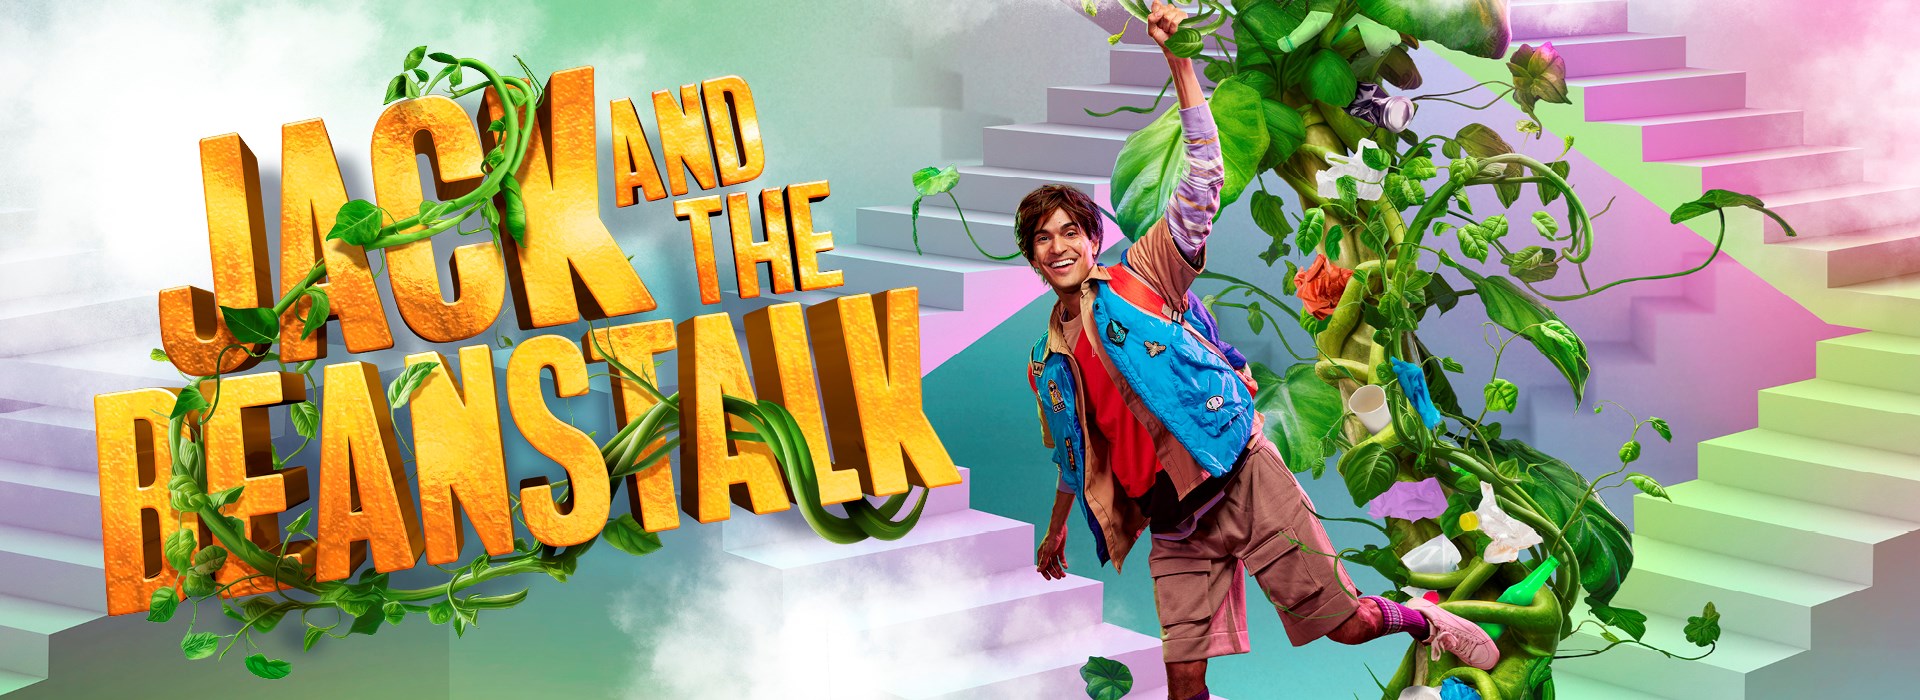 Jack and the Beanstalk Stratford East